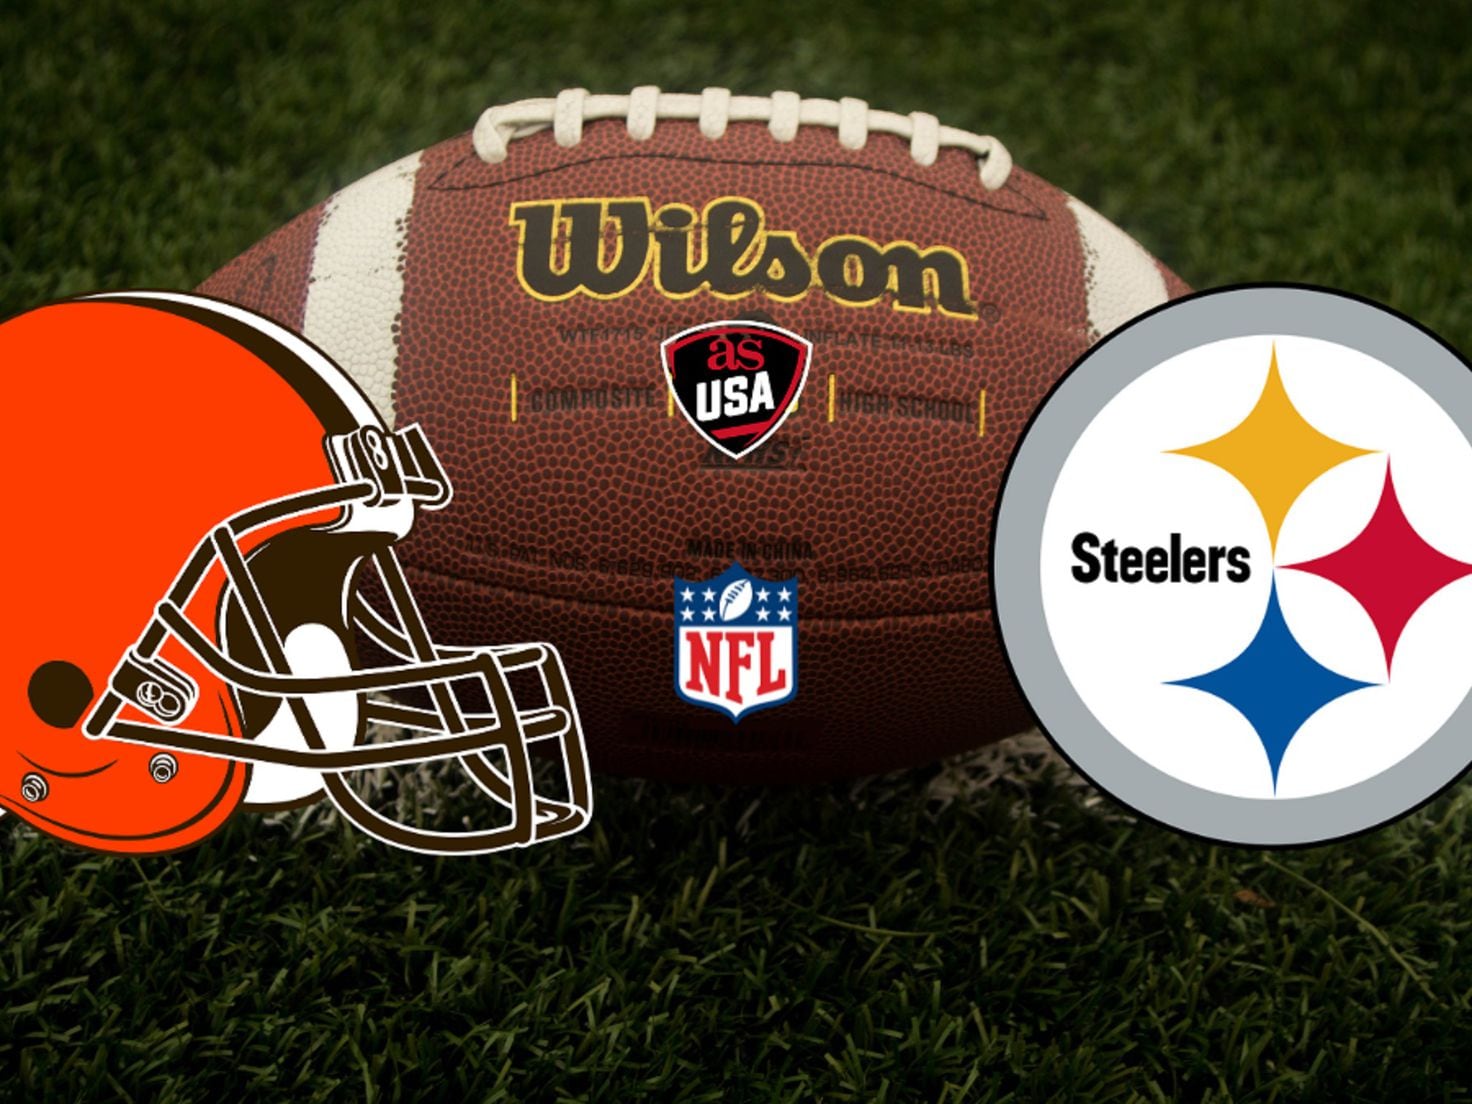 pittsburgh and cleveland browns